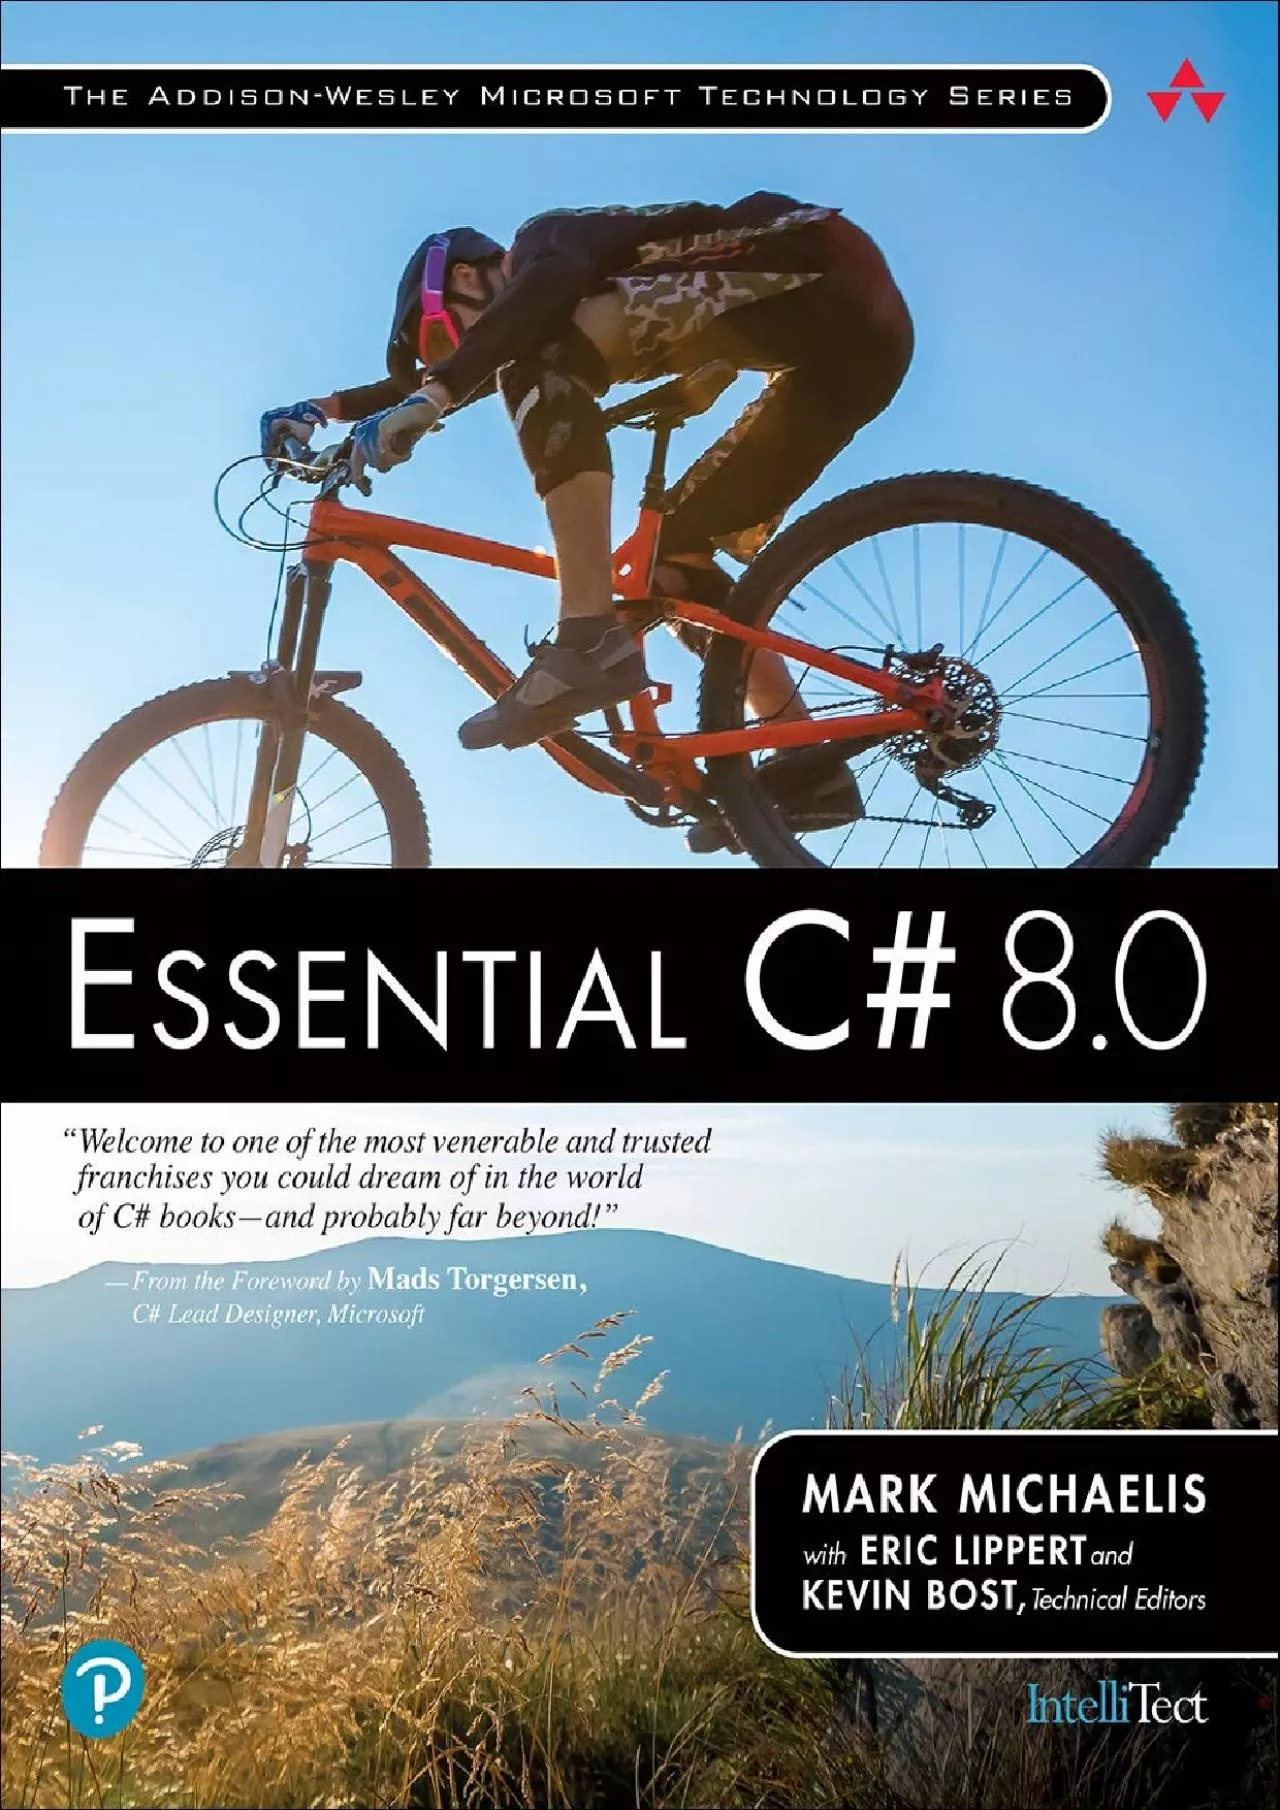 [READING BOOK]-Essential C 8.0 (Addison-Wesley Microsoft Technology Series)